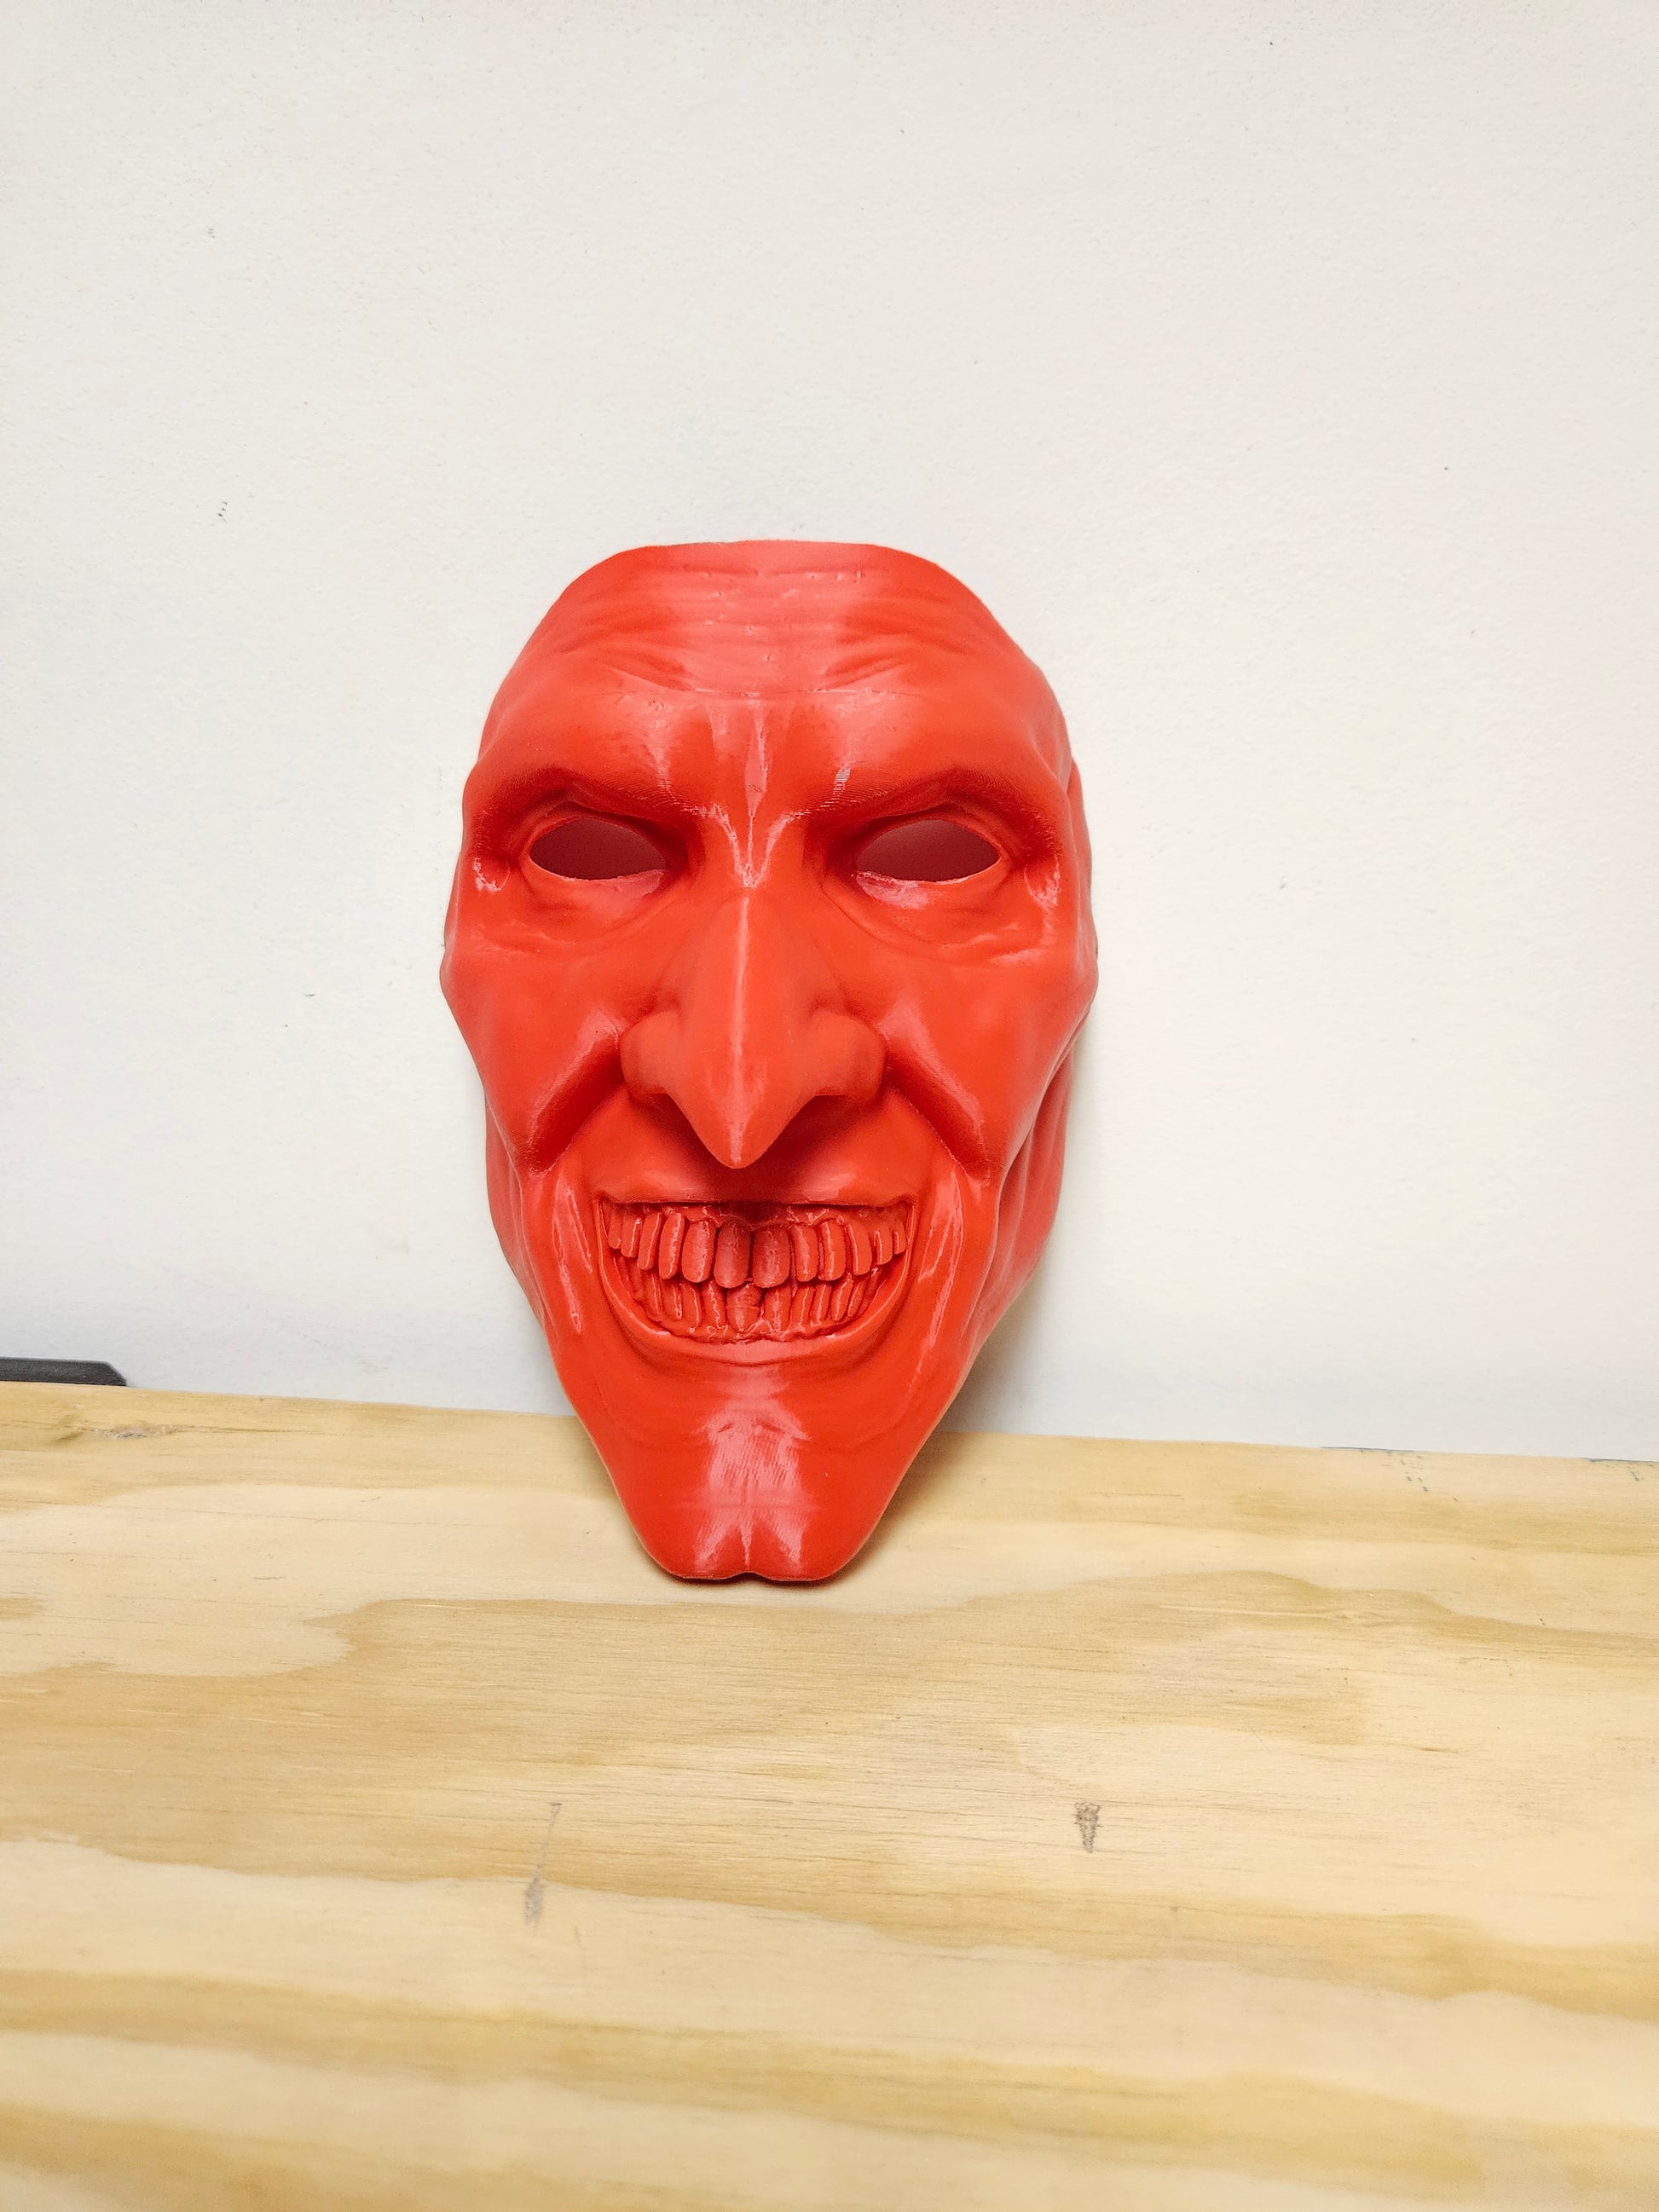 Art the clown from the Terrifier movie mask is 3D printed DIY kit that can be painted and accented in realistic FAKE blood paint or without by us, or do it yourself Available now from Aviator 3D Printing .com